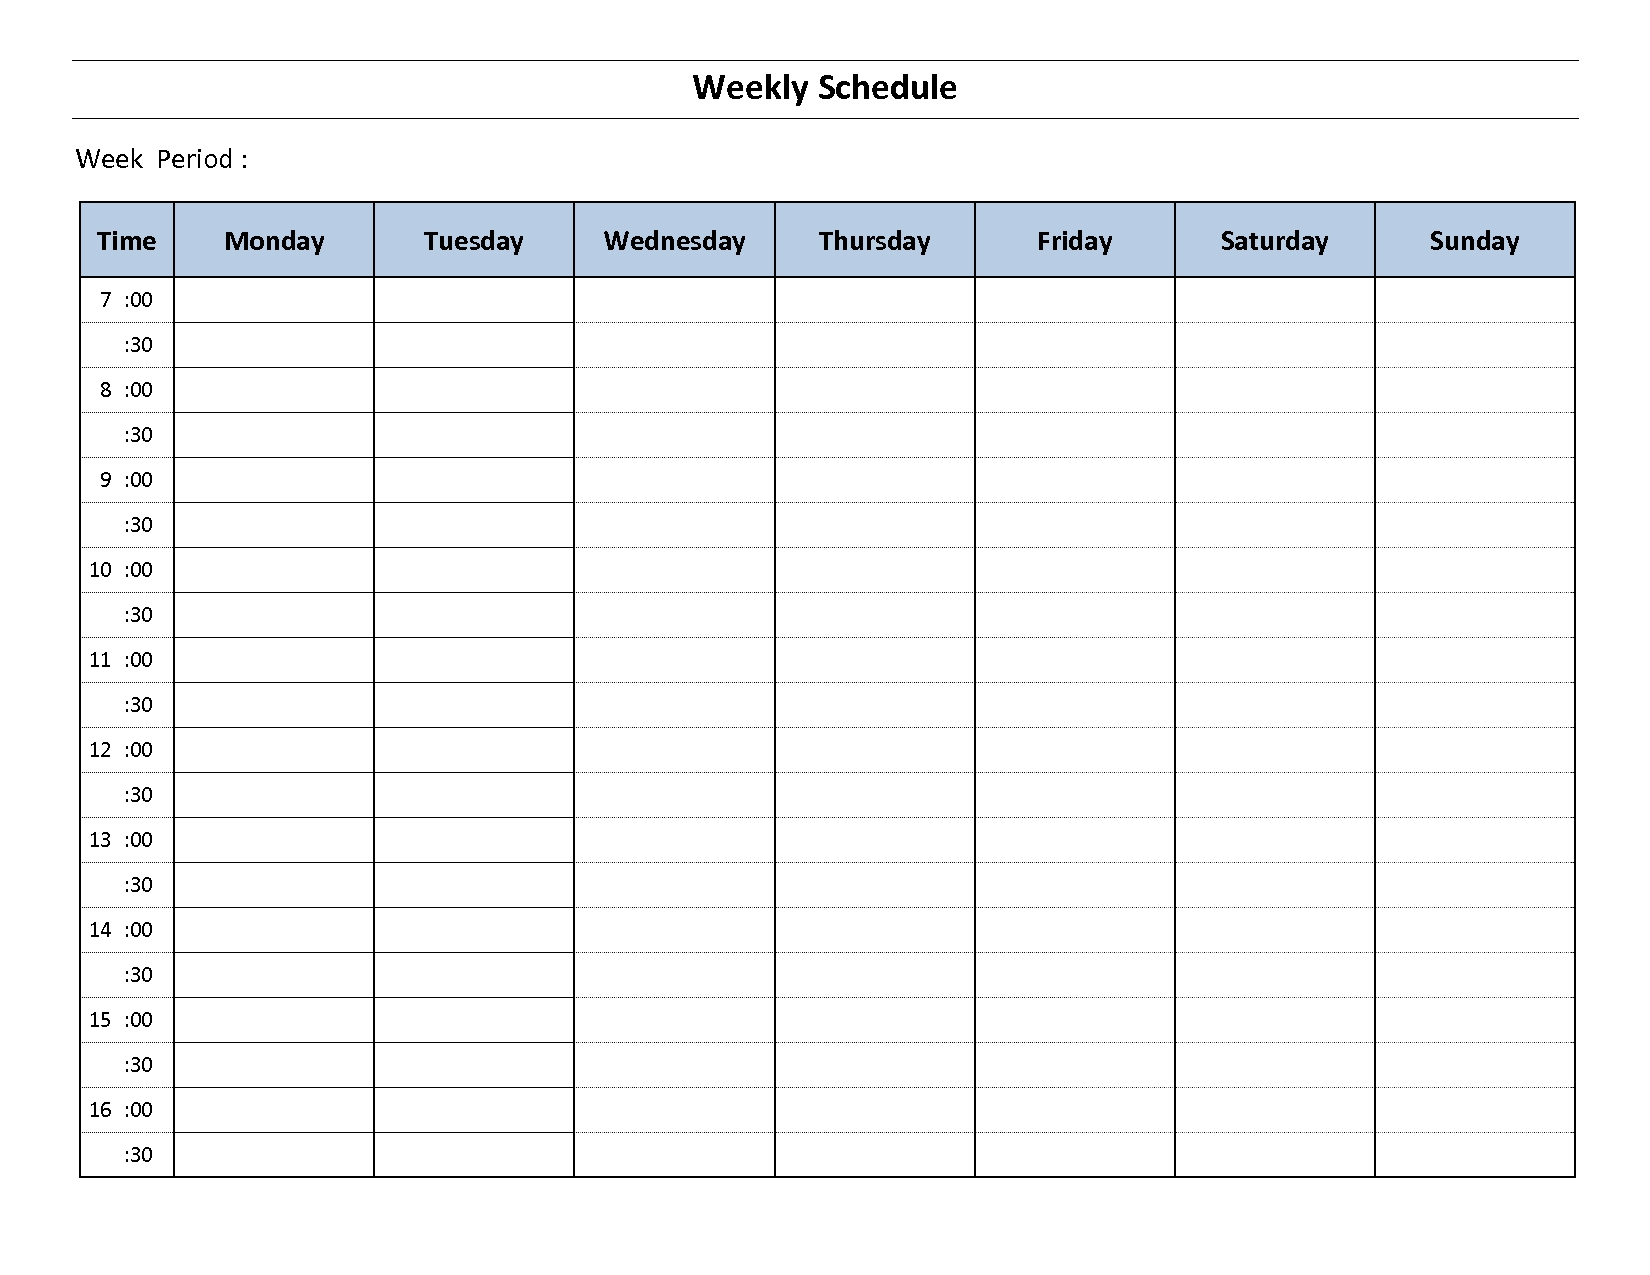 Weekly Calendar With Time Slots Template | Calendar for Weekly Planner With Time Slots Printable